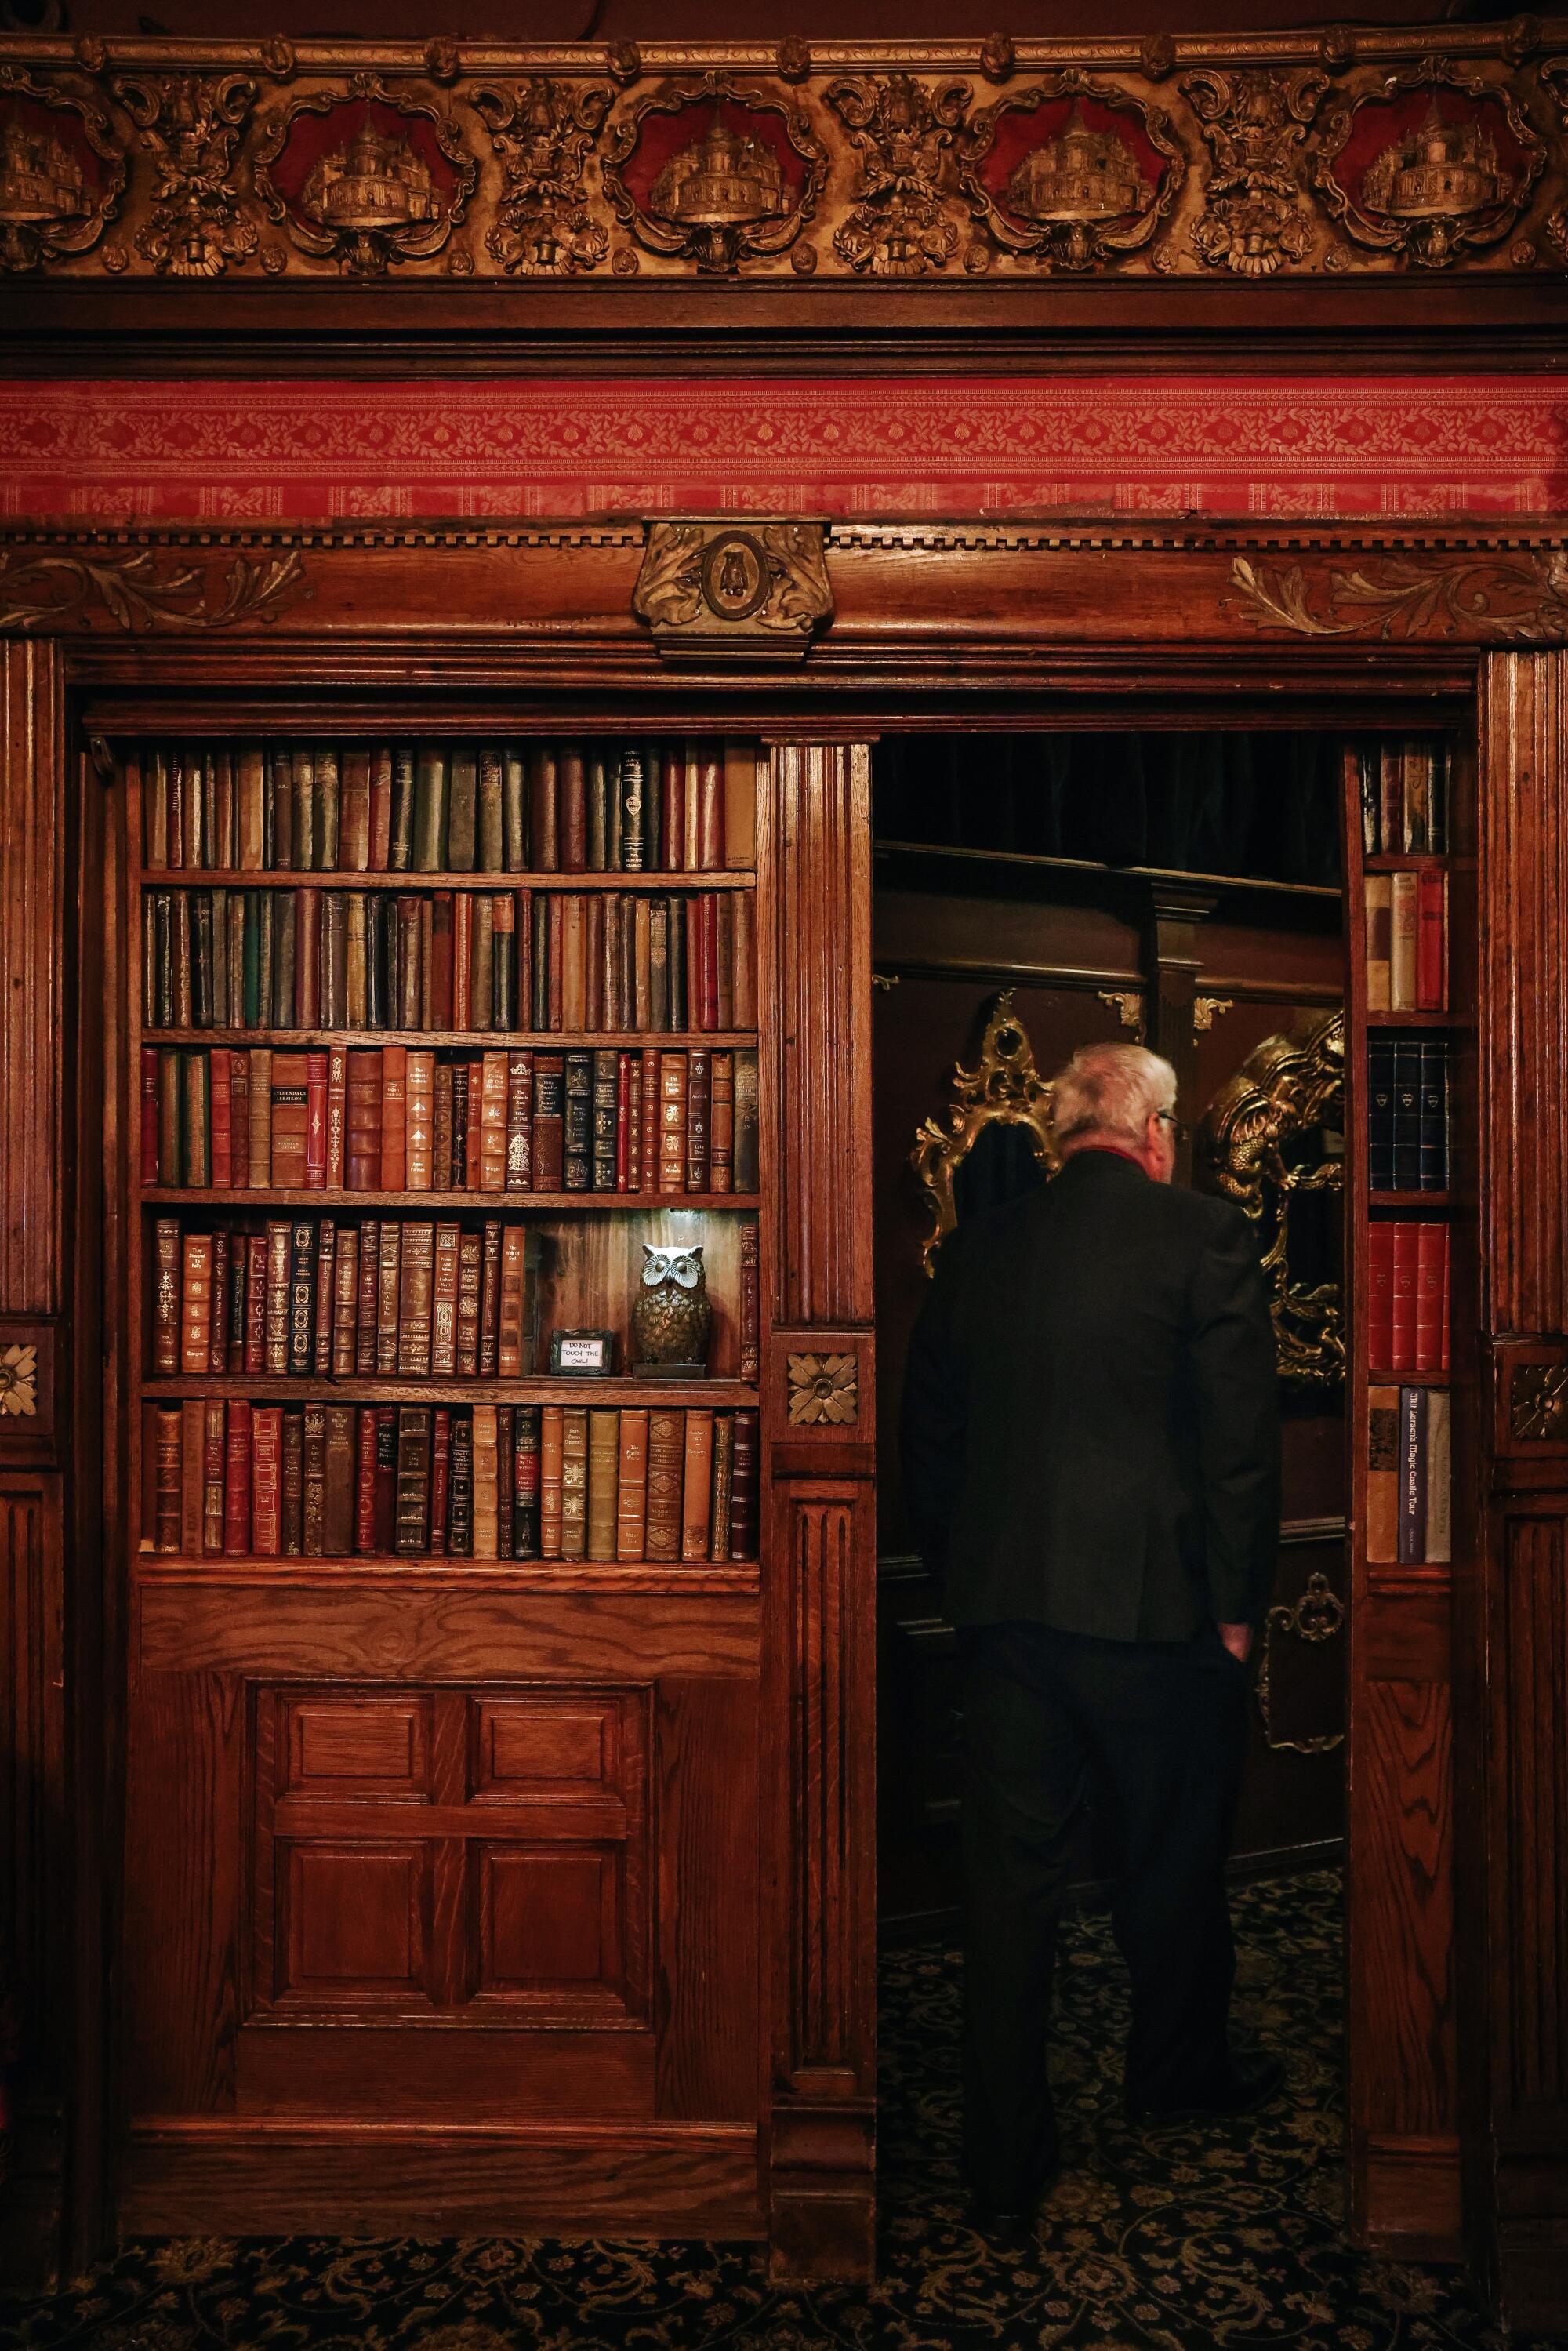 A guest disappears behind a faux bookshelf.